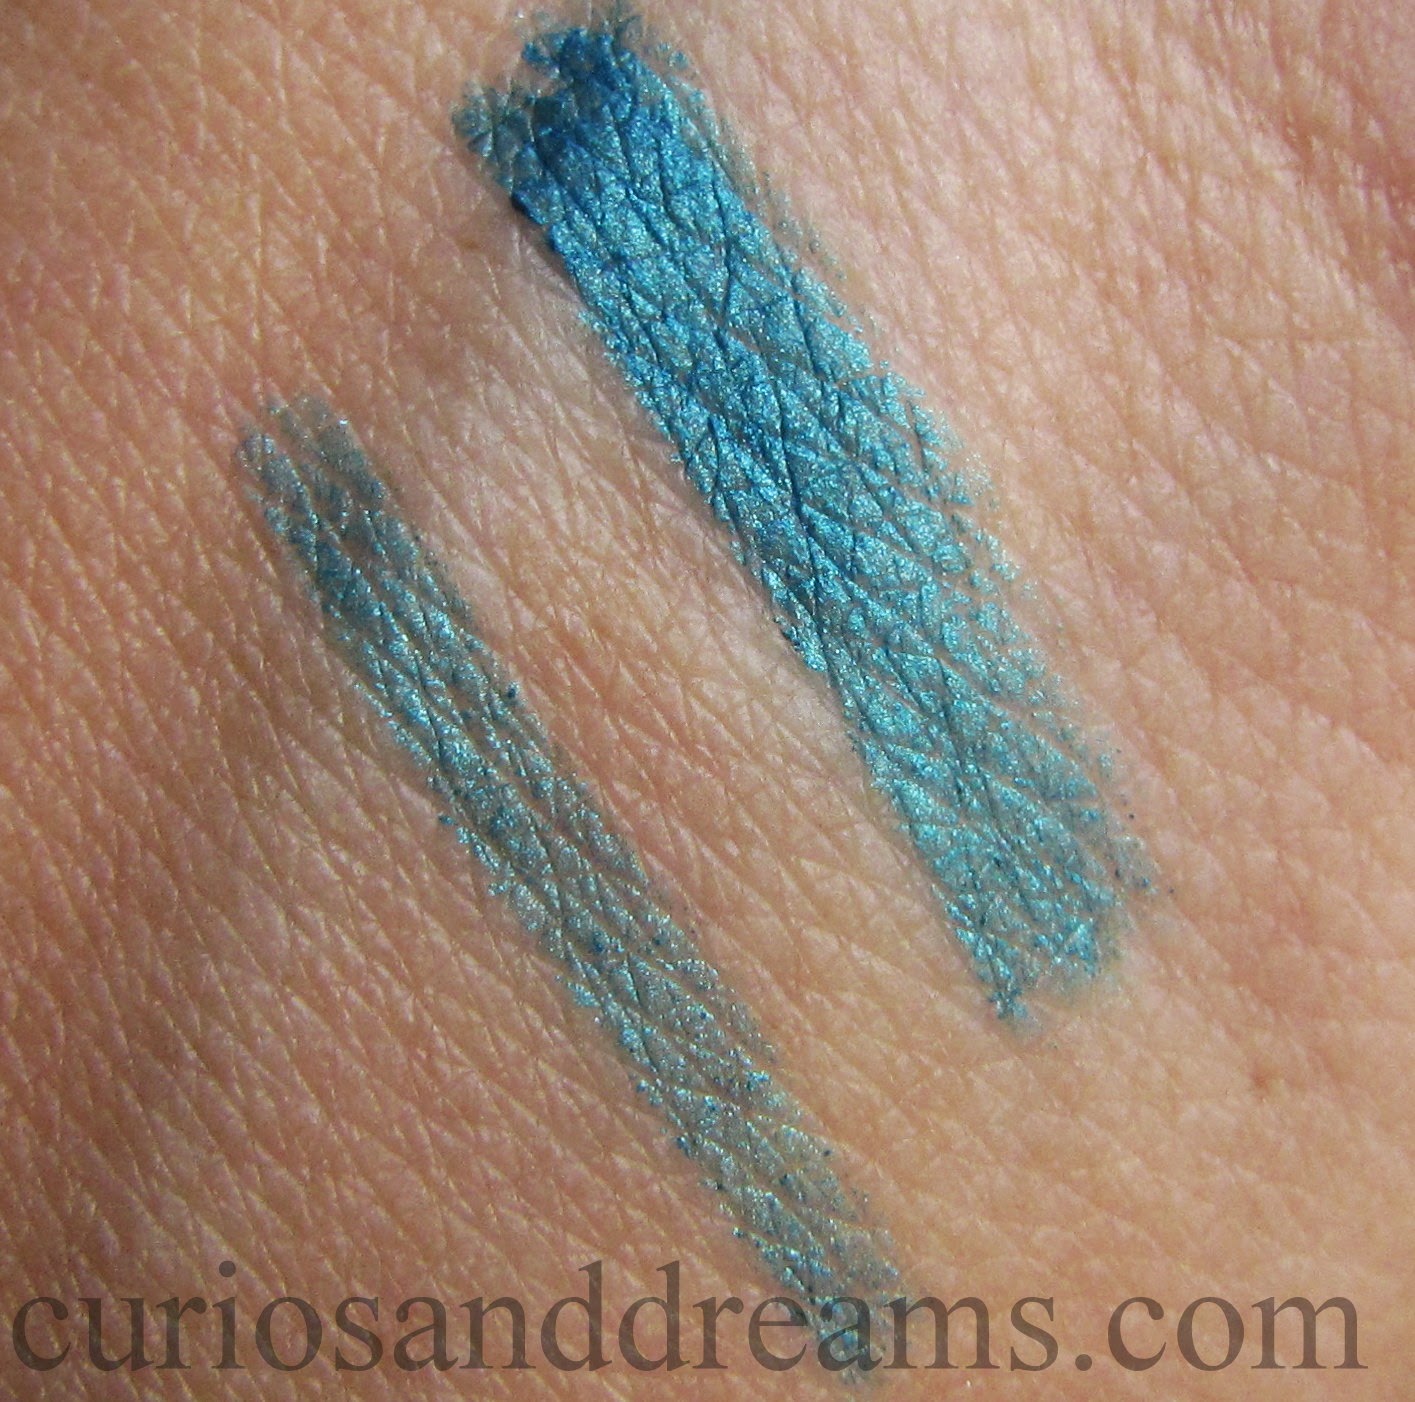 Maybelline the Colossal Kohl Turquoise Review, Maybelline the Colossal Kohl Turquoise Swatches, Maybelline the Colossal Kohl Turquoise EOTD